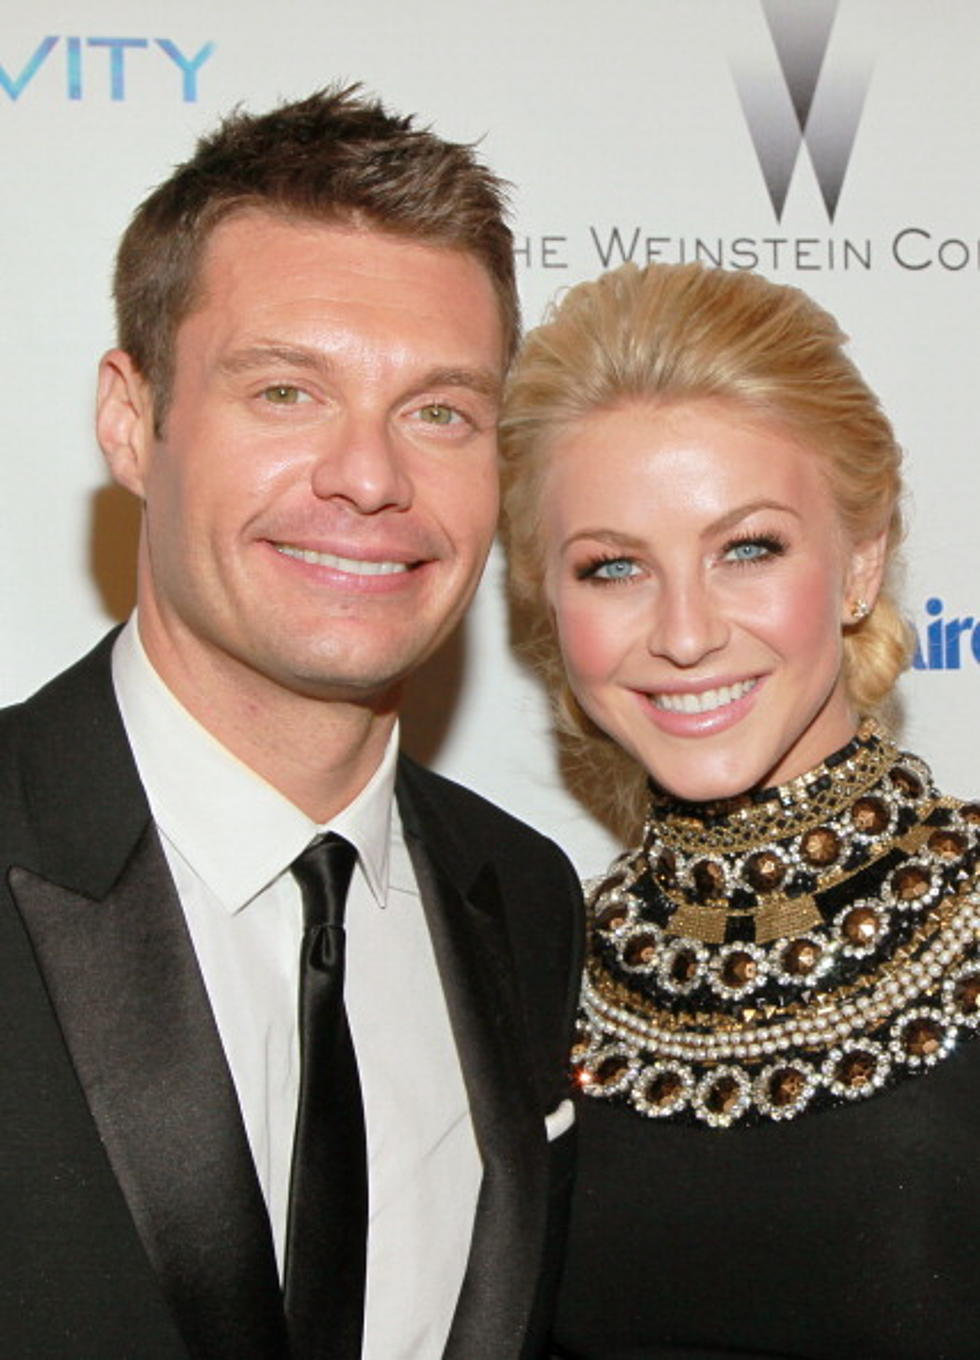 Ryan Seacrest And Julianne Hough May Be Engaged